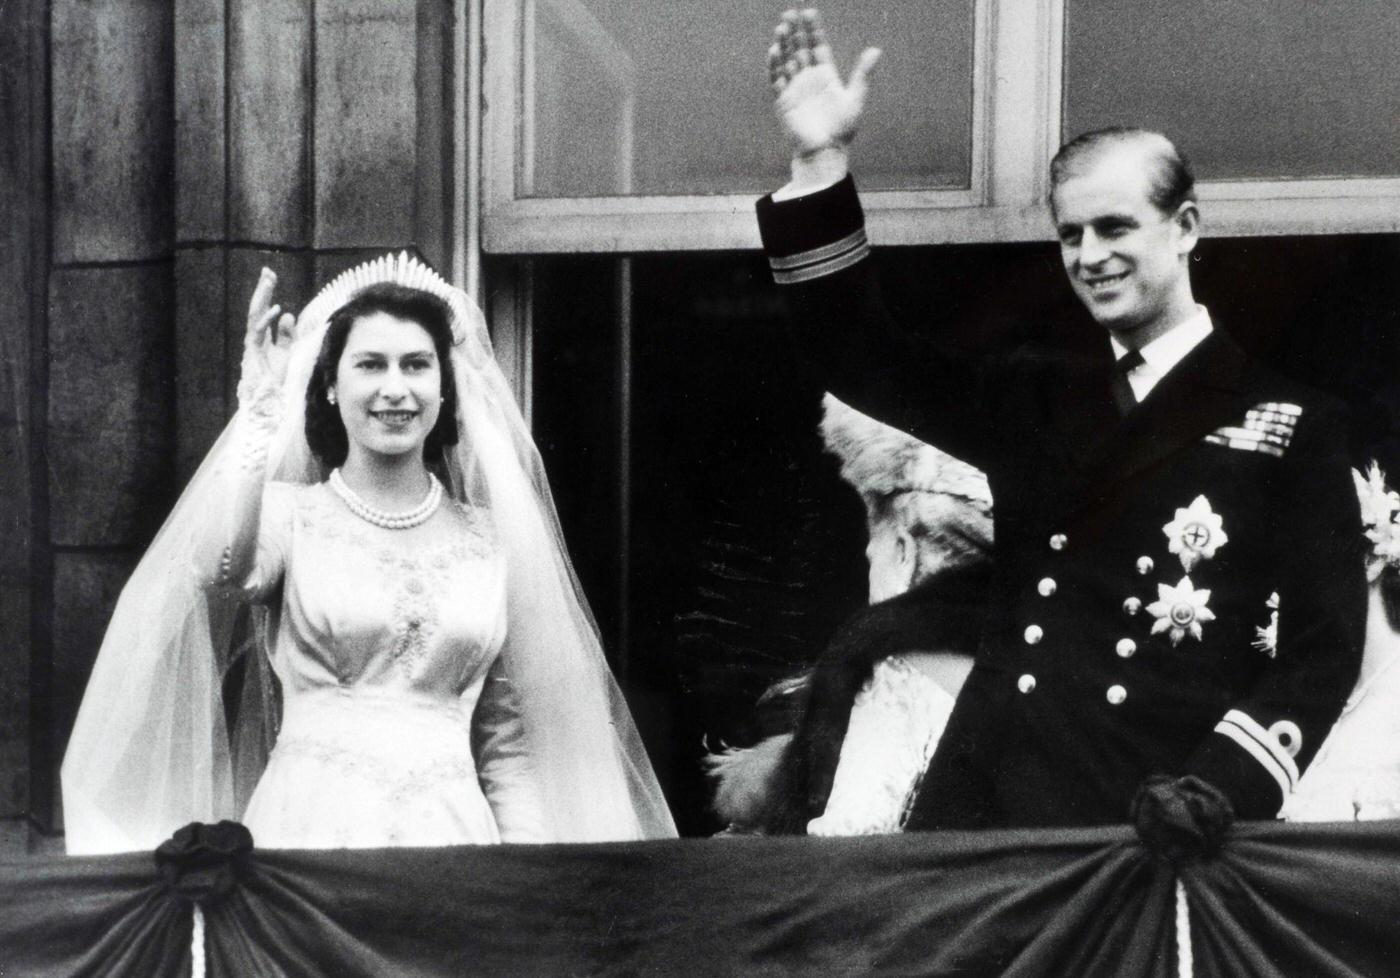 Princess Elizabeth (now The Queen) and Prince Philip, The Duke of Edinburgh, wave to crowds from the balcony of Buckingham Palace following their marriage, London, England, 20 November 1947.